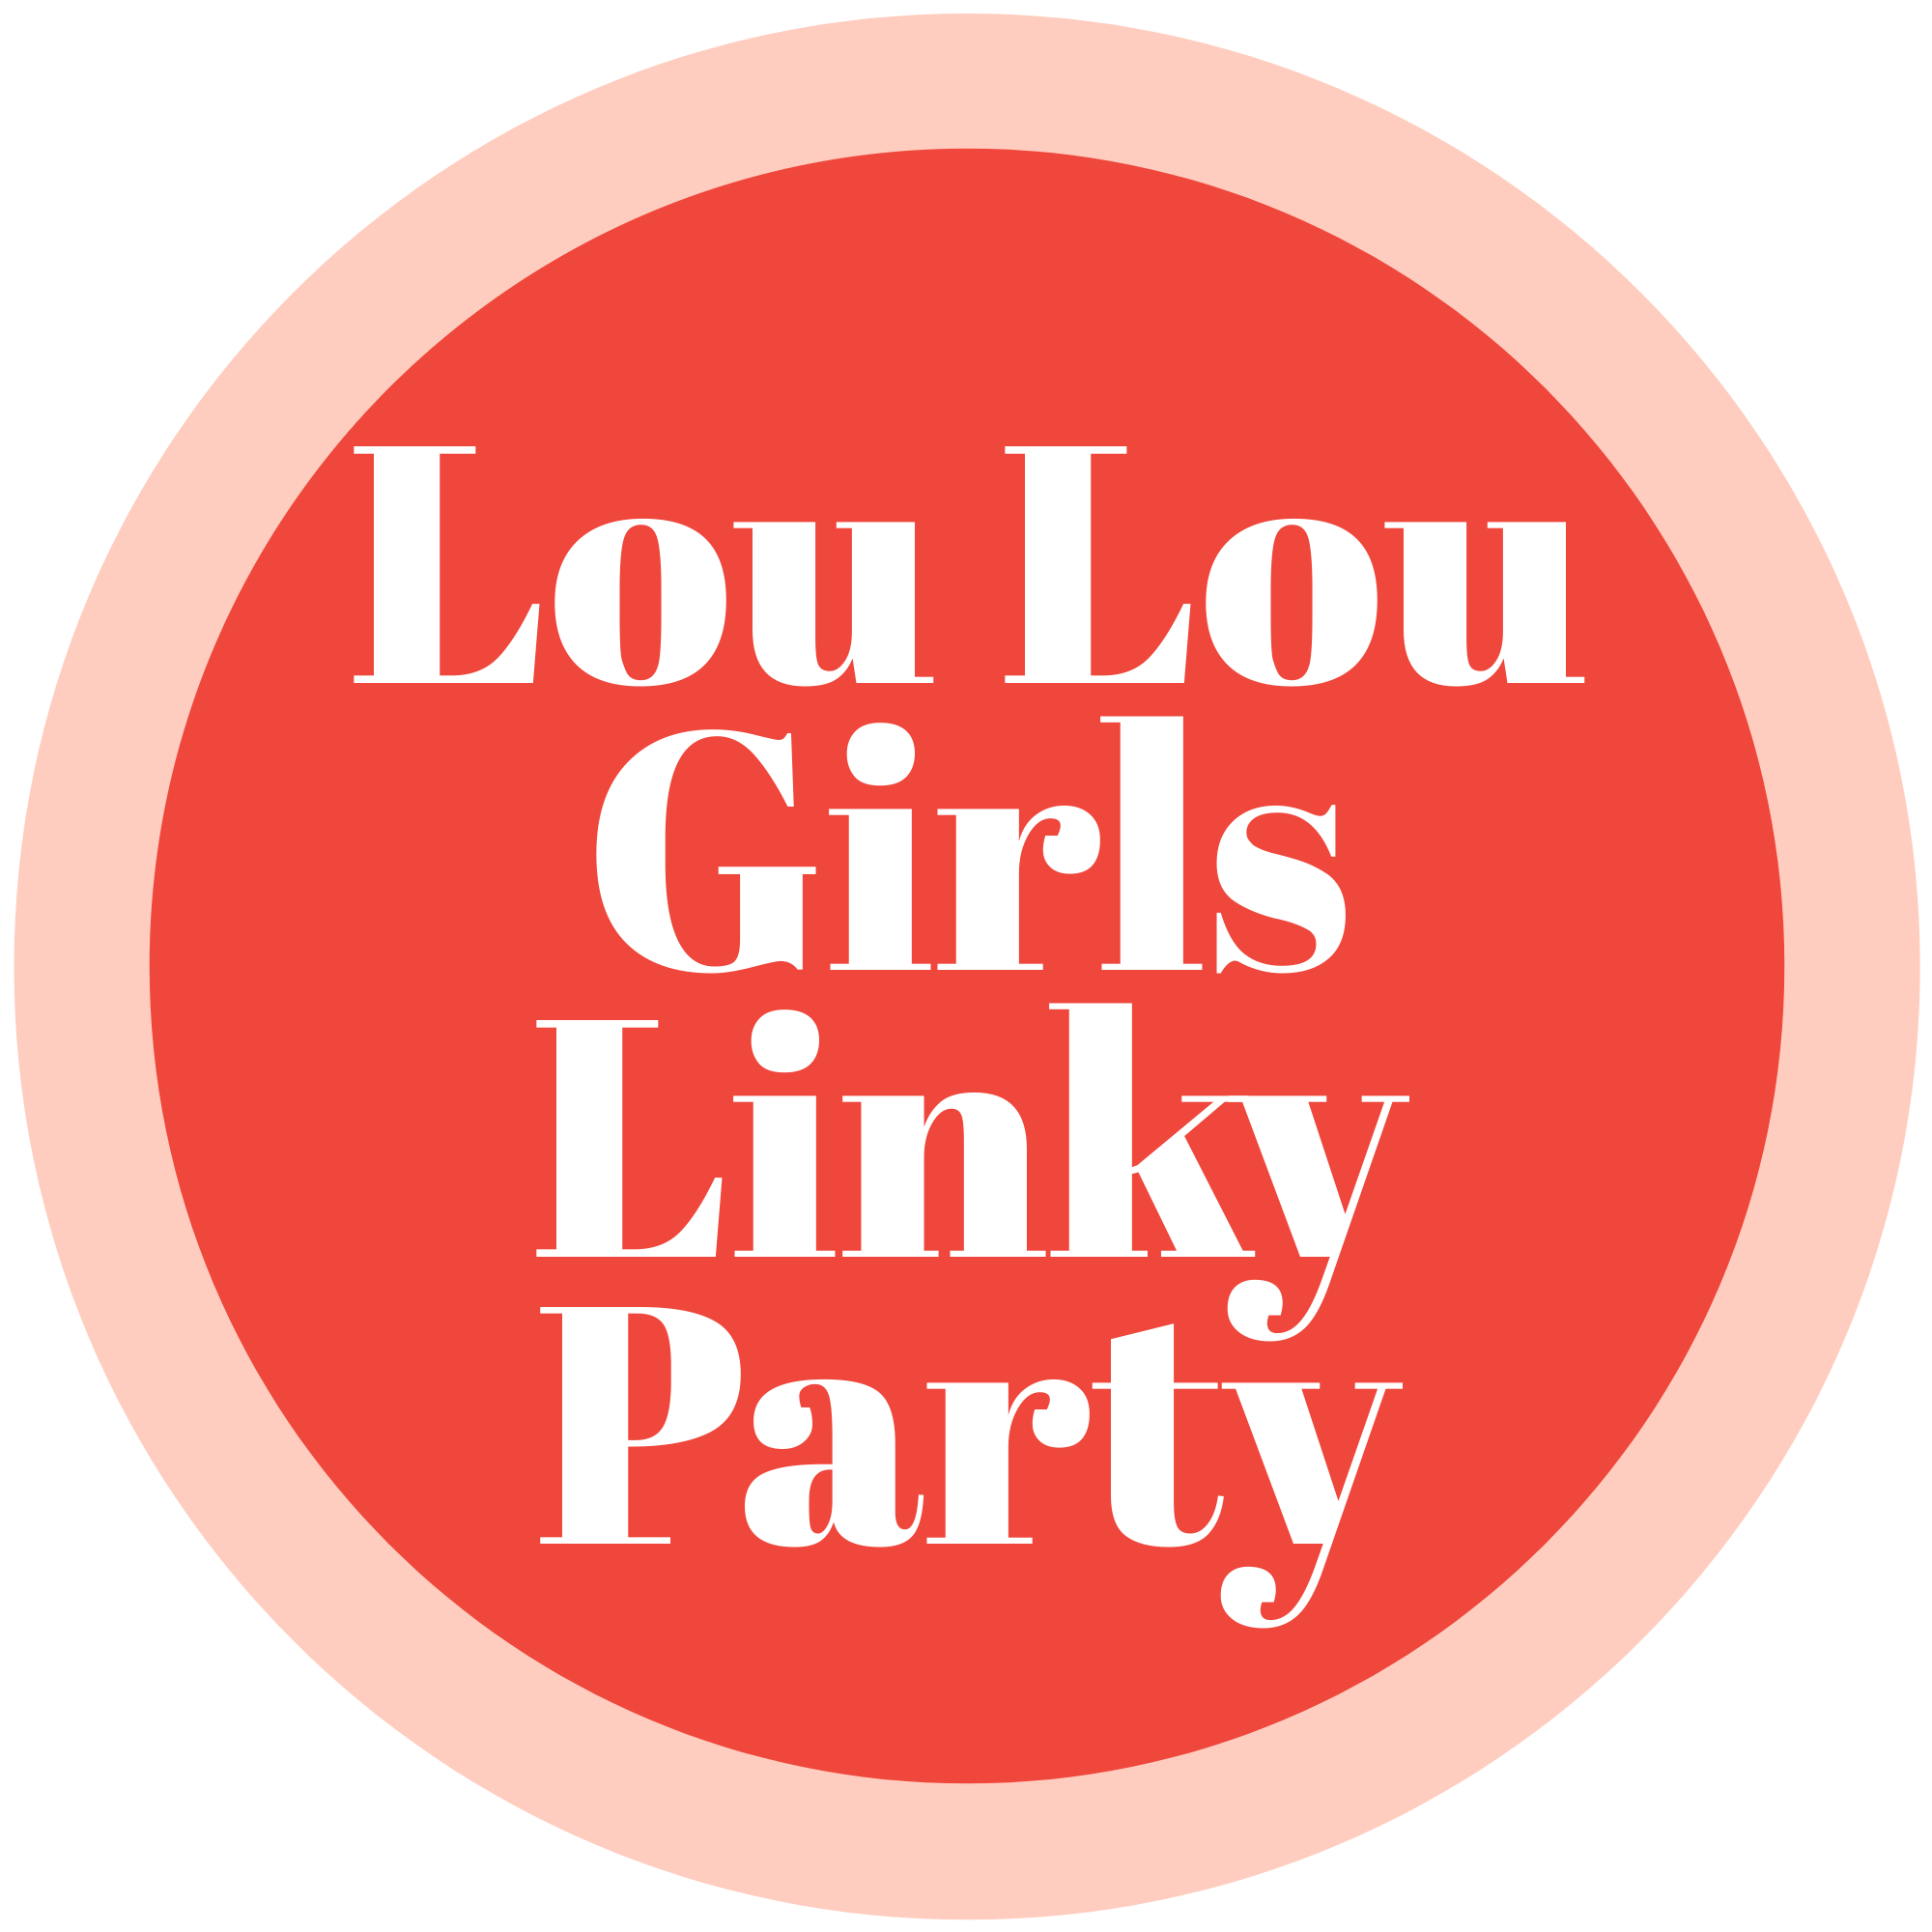 Lou Lou Girls Fabulous Party 488 #linkyparty #bloghop #linkyparties